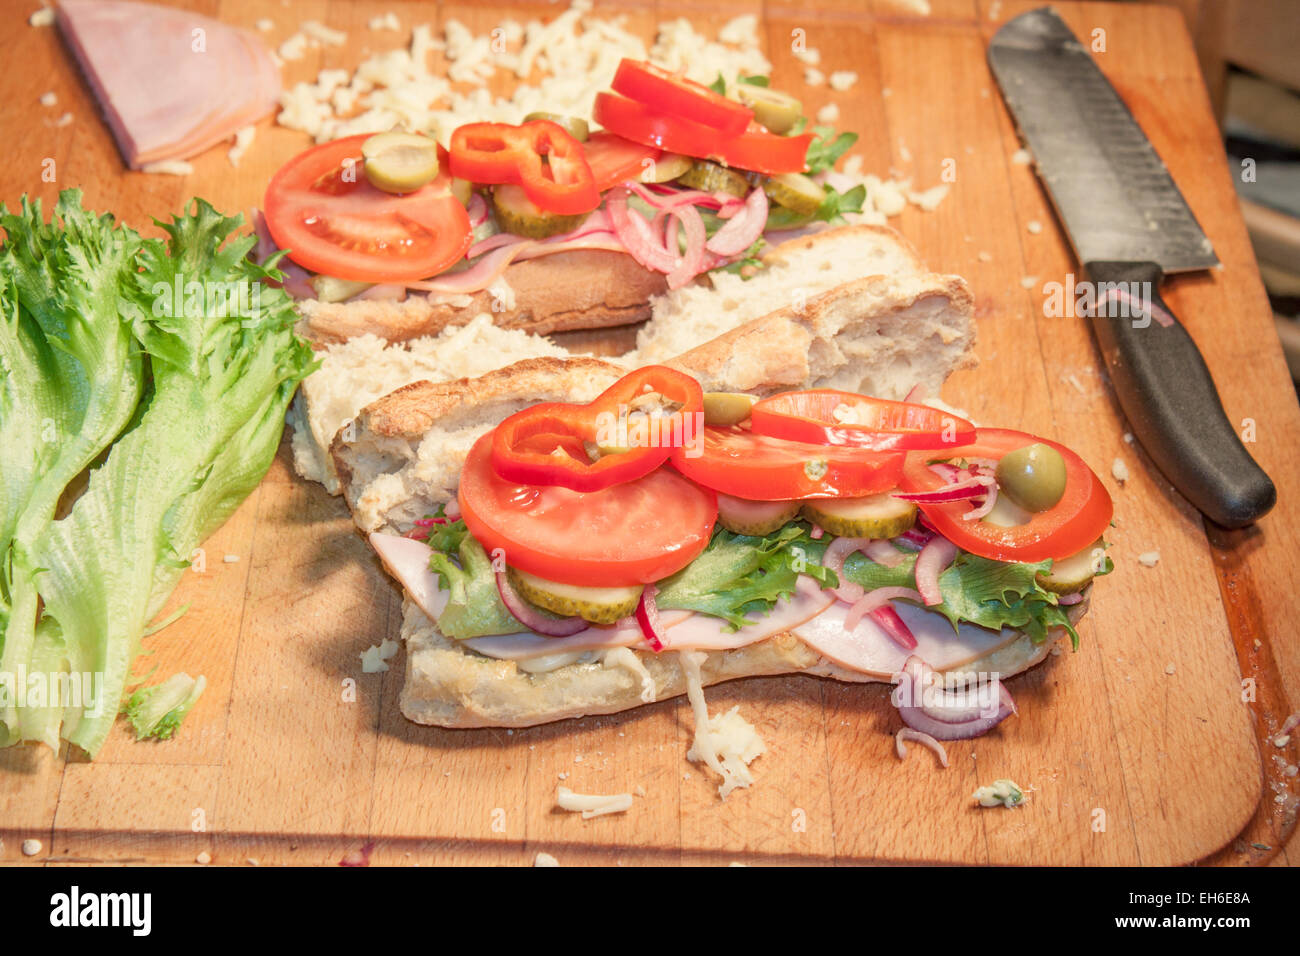 French bread sandwich, filled with ham, salad, red onion and tomato Stock Photo